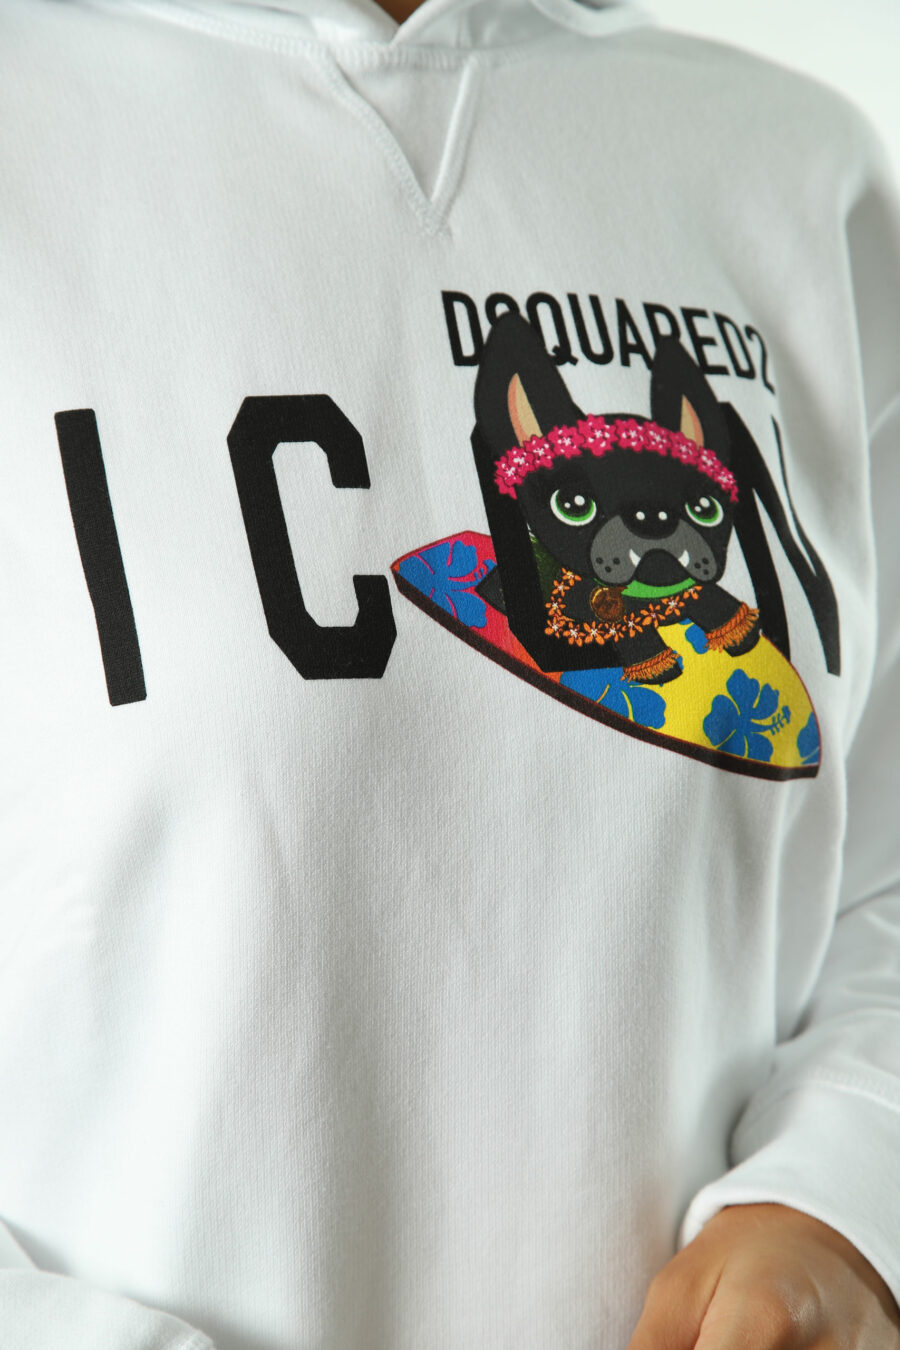 White hooded sweatshirt with "icon" logo and surfer dog - Photos 1608